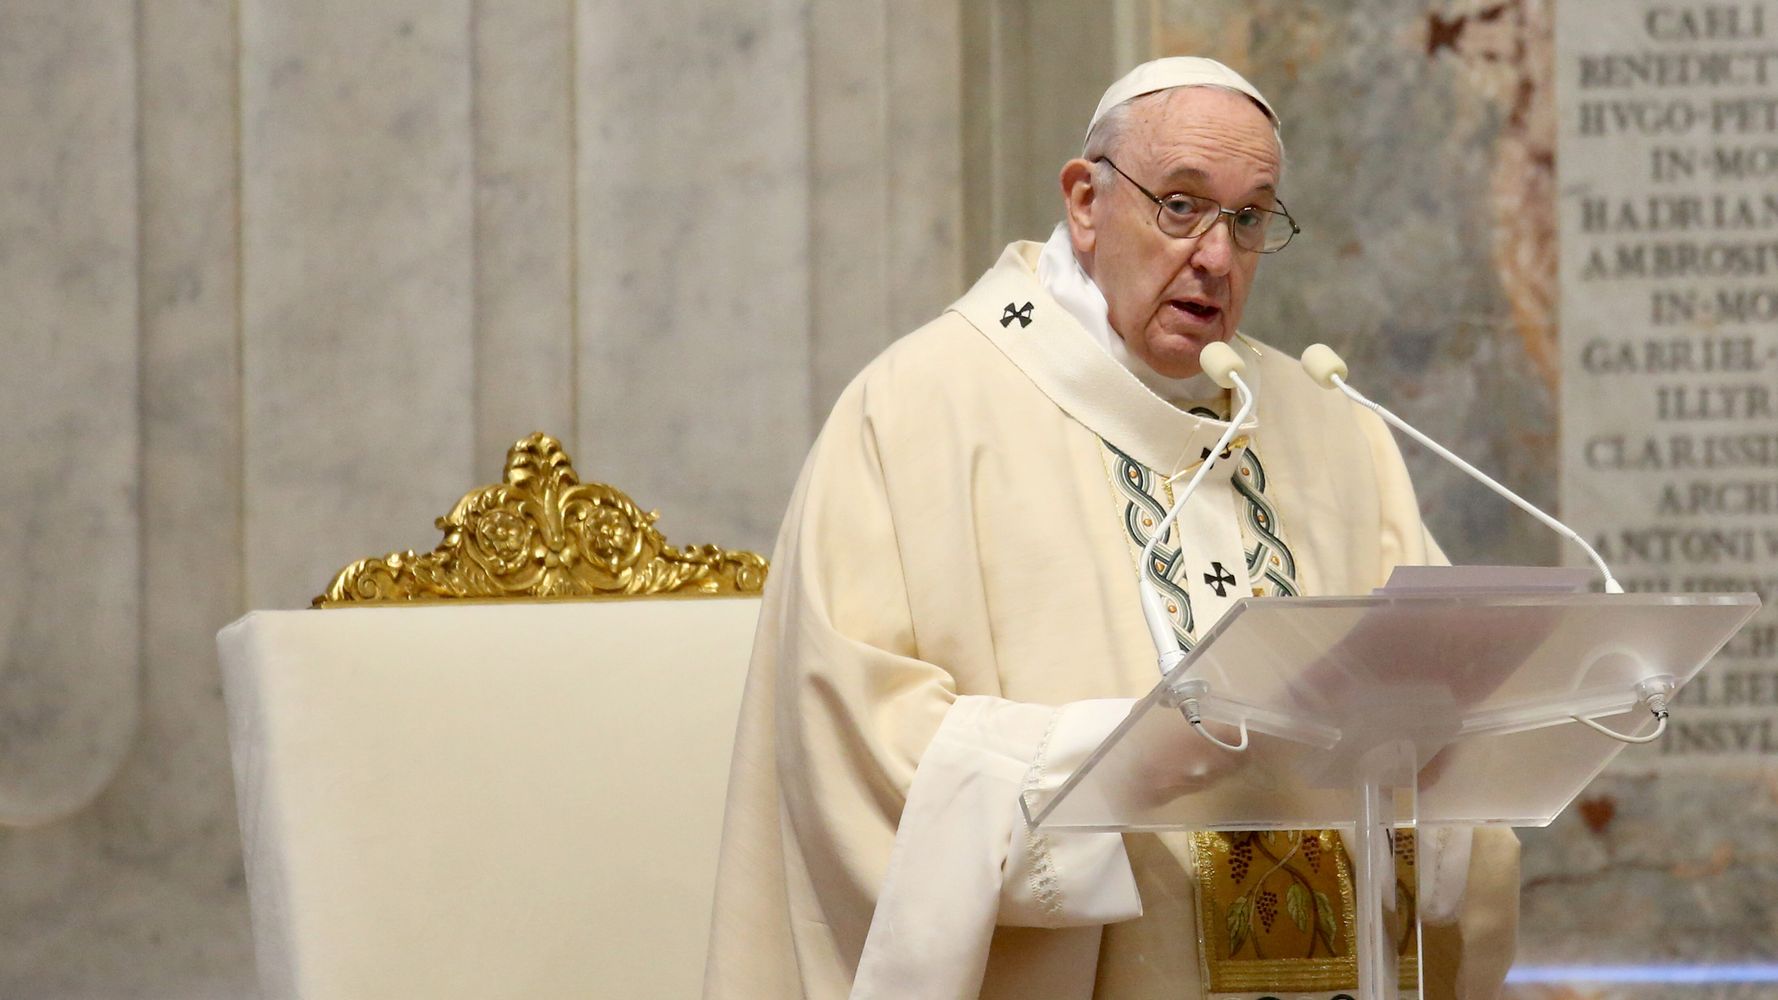 Pope Francis Urges Solidarity In A COVID-19 World In Rare Op-Ed